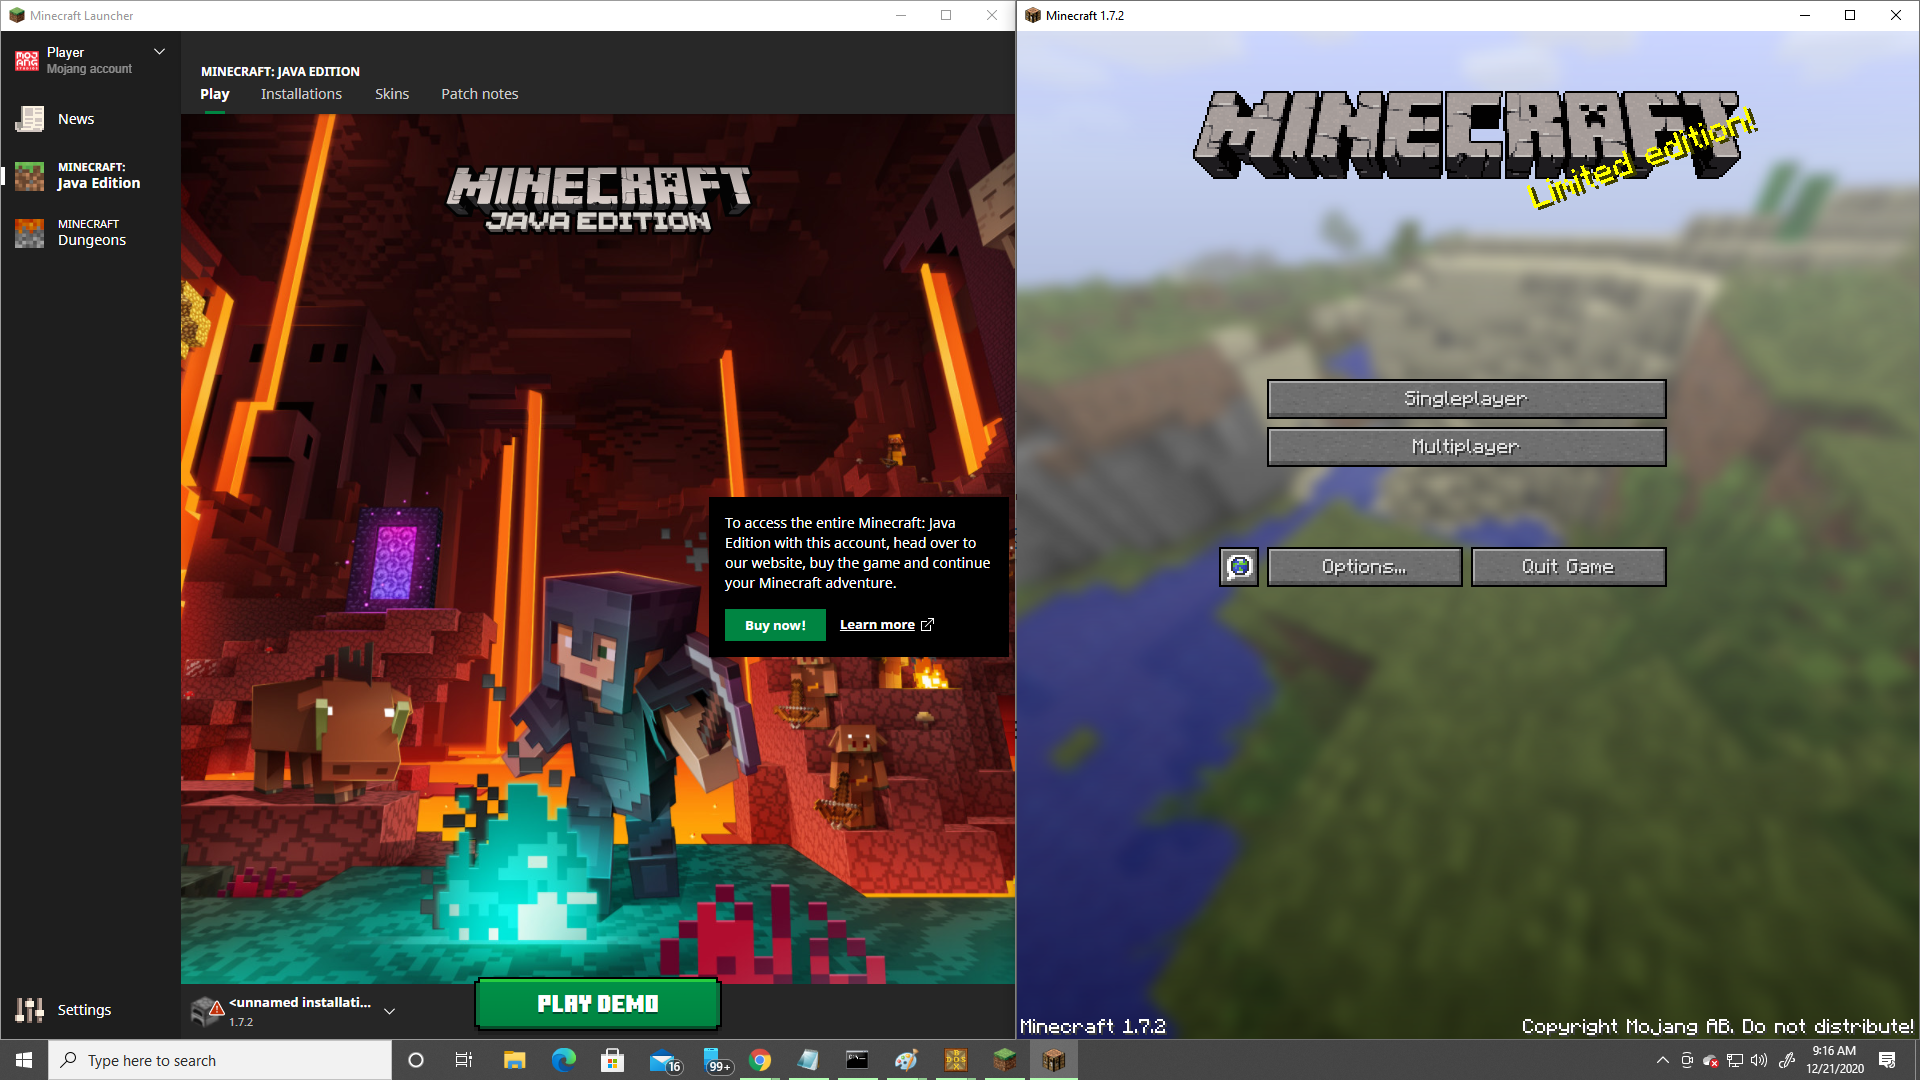 Minecraft Java Edition not showing up as purchased on the